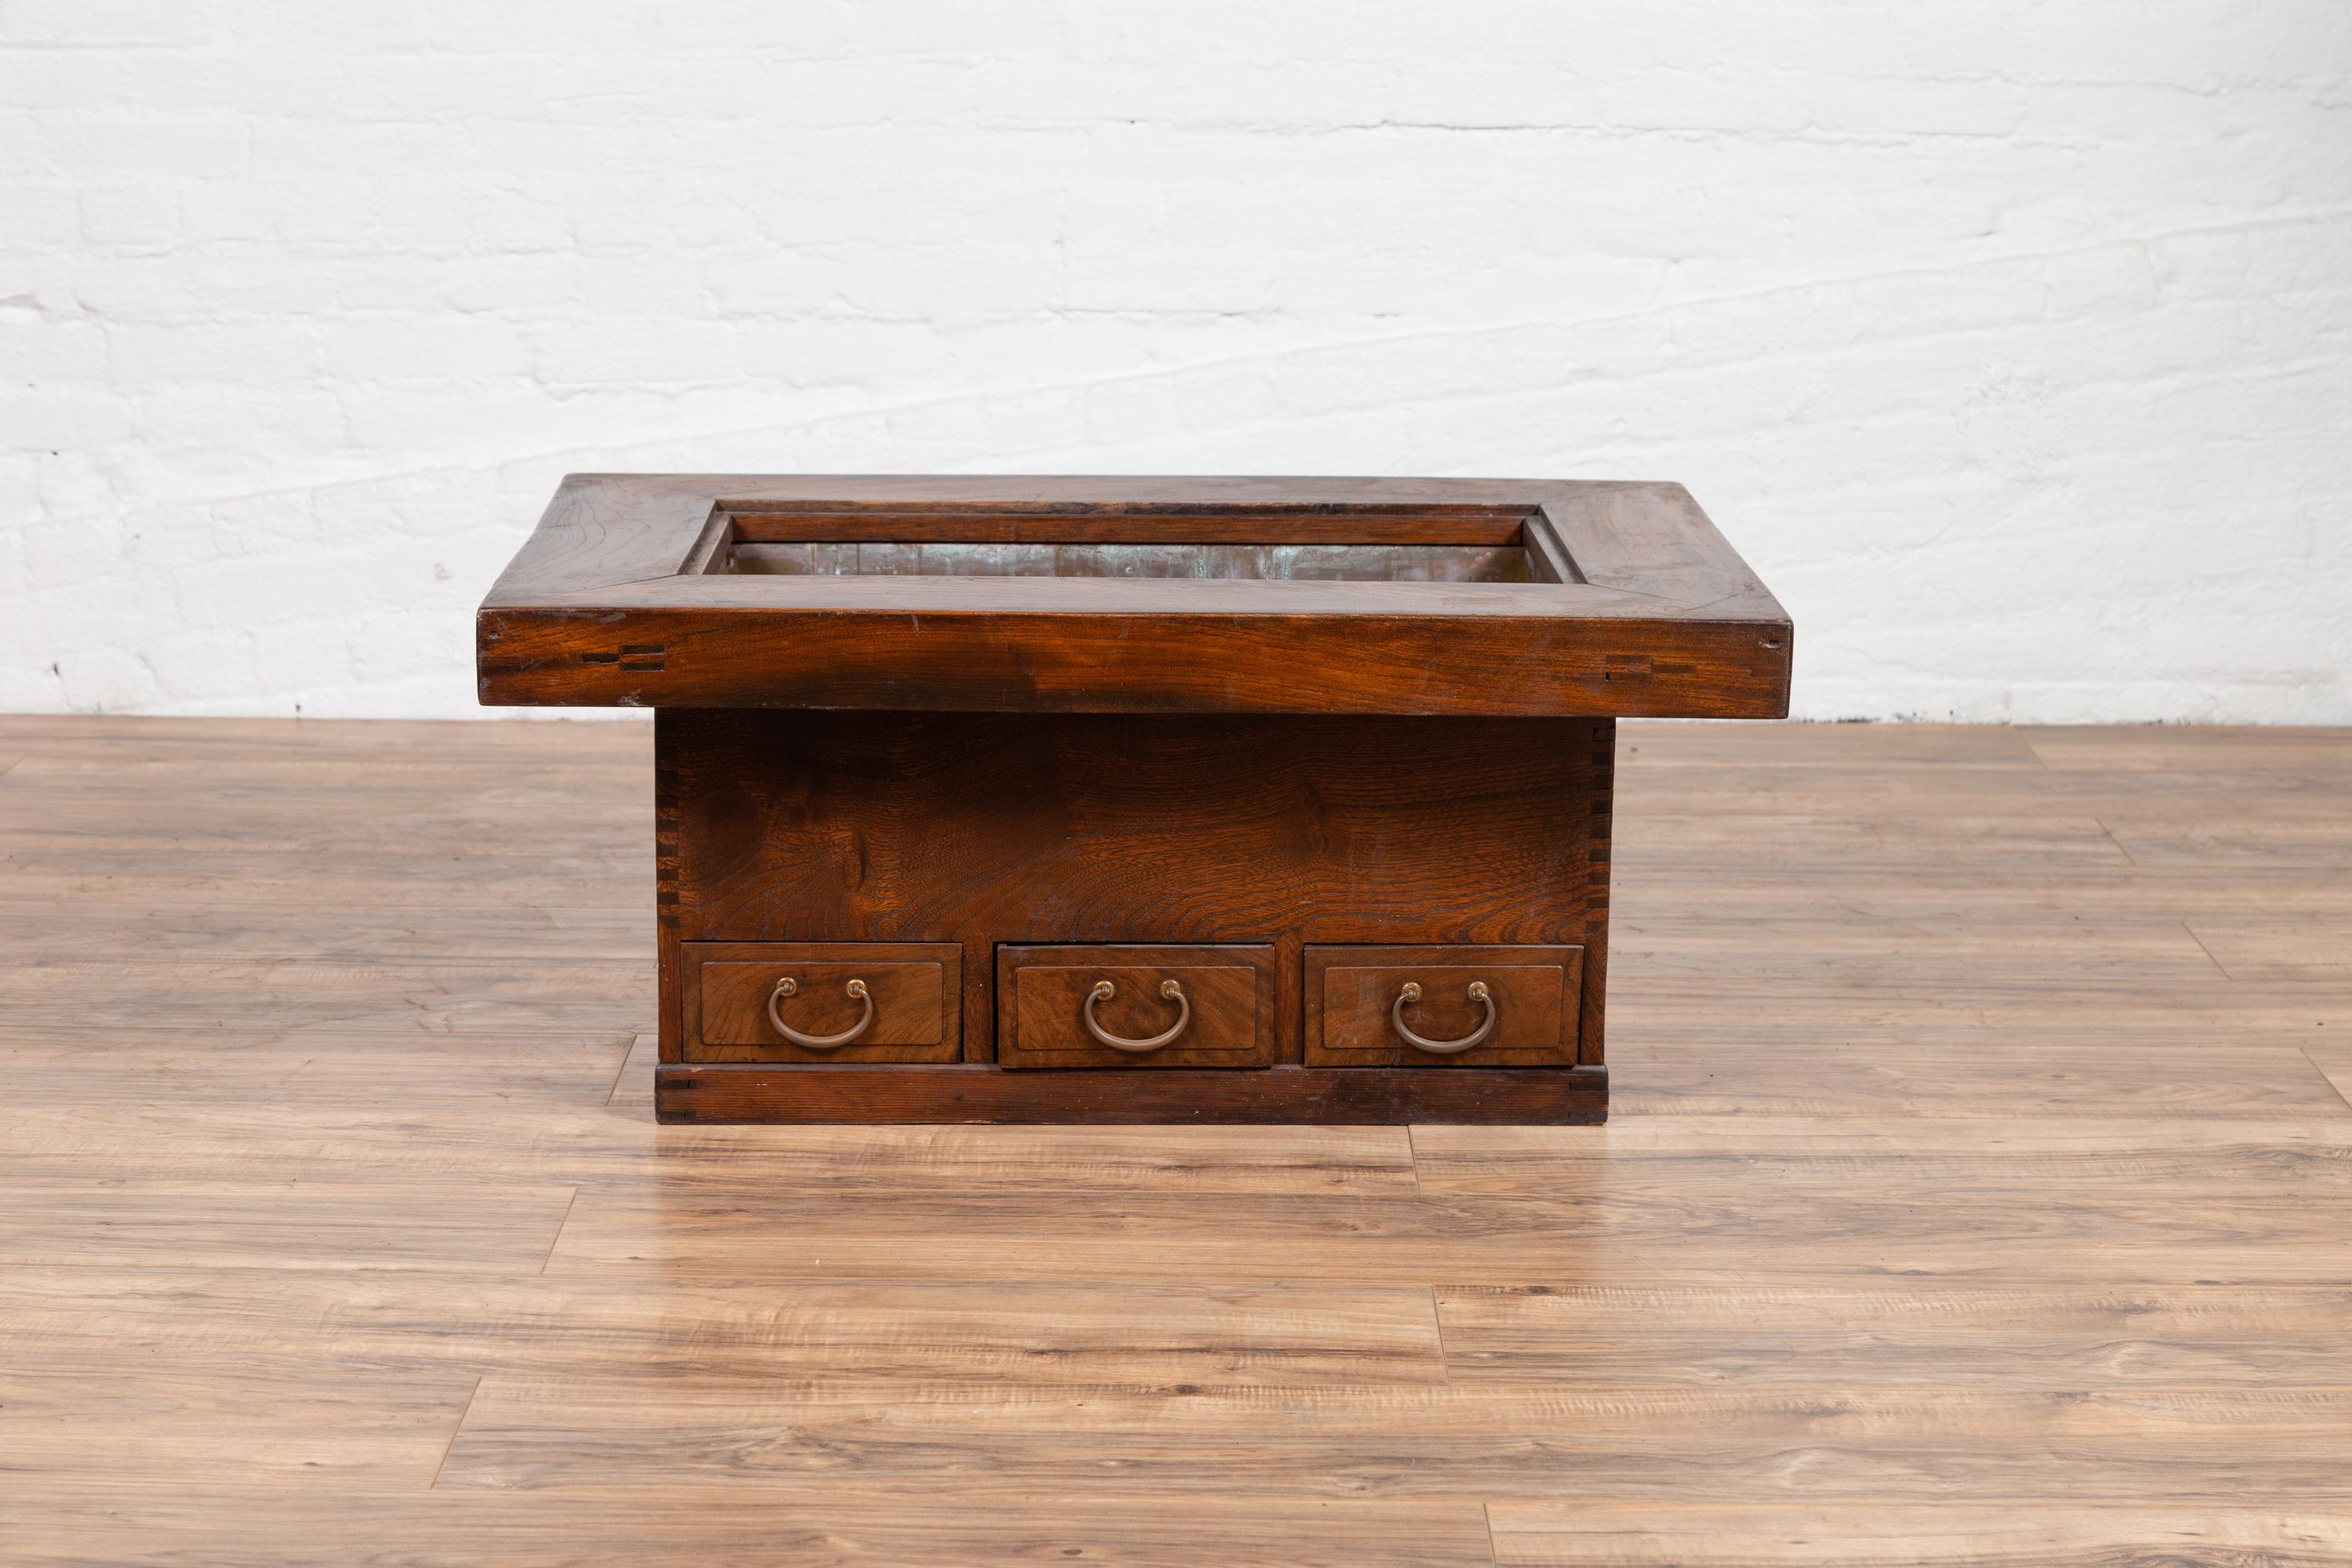 An antique 19th century Japanese rectangular keyaki wood hibachi from the Meiji period, with copper liner and three drawers. Used for cooking or warming sake or tea, this elegant hibachi features a rectangular frame surrounding the central opening